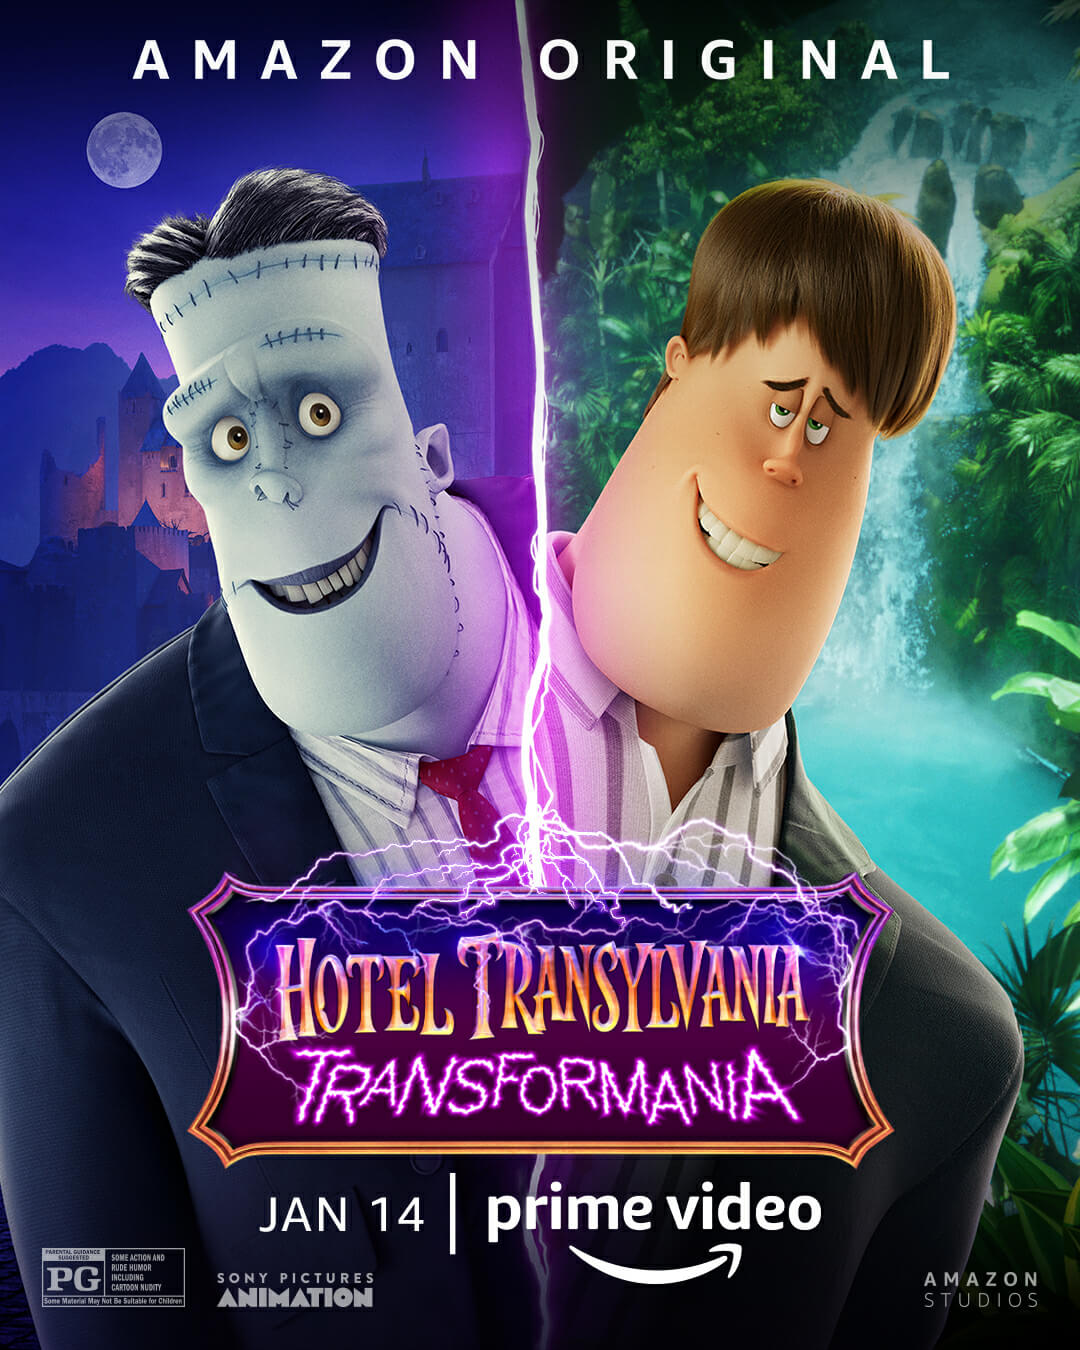 Animated movie Hotel Transylvania 4 Transformania released character posters-6